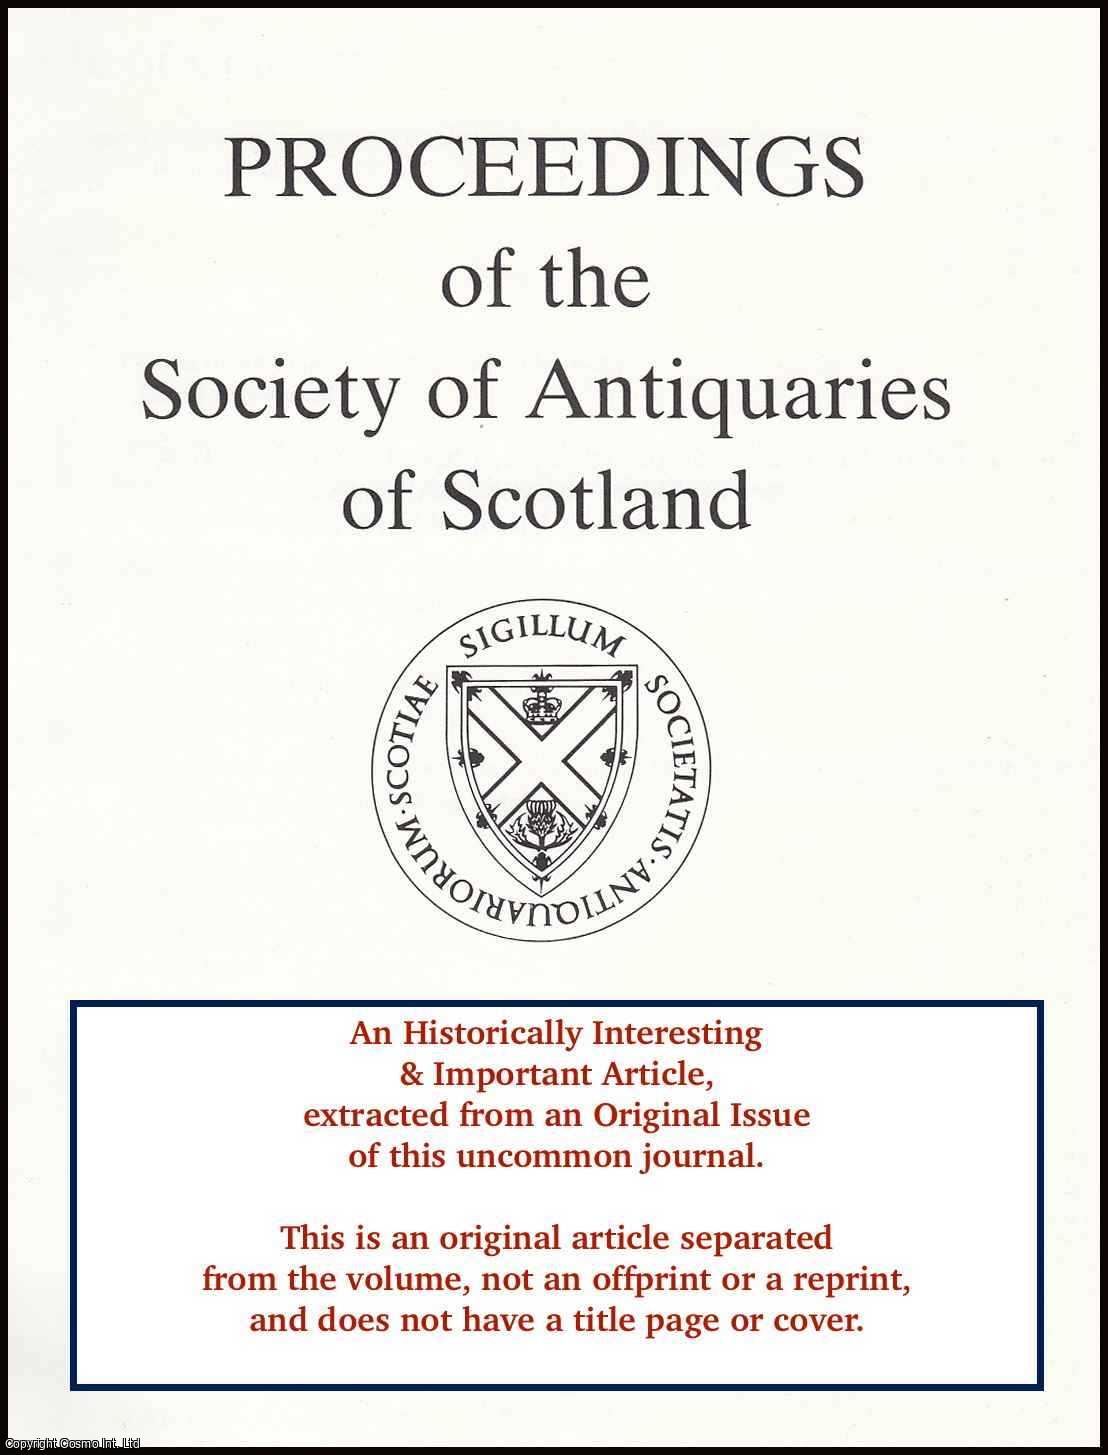 Richard Hingley - Society in Scotland From 700 BC to AD 200. An original article from the Proceedings of the Society of Antiquaries of Scotland, 1992.